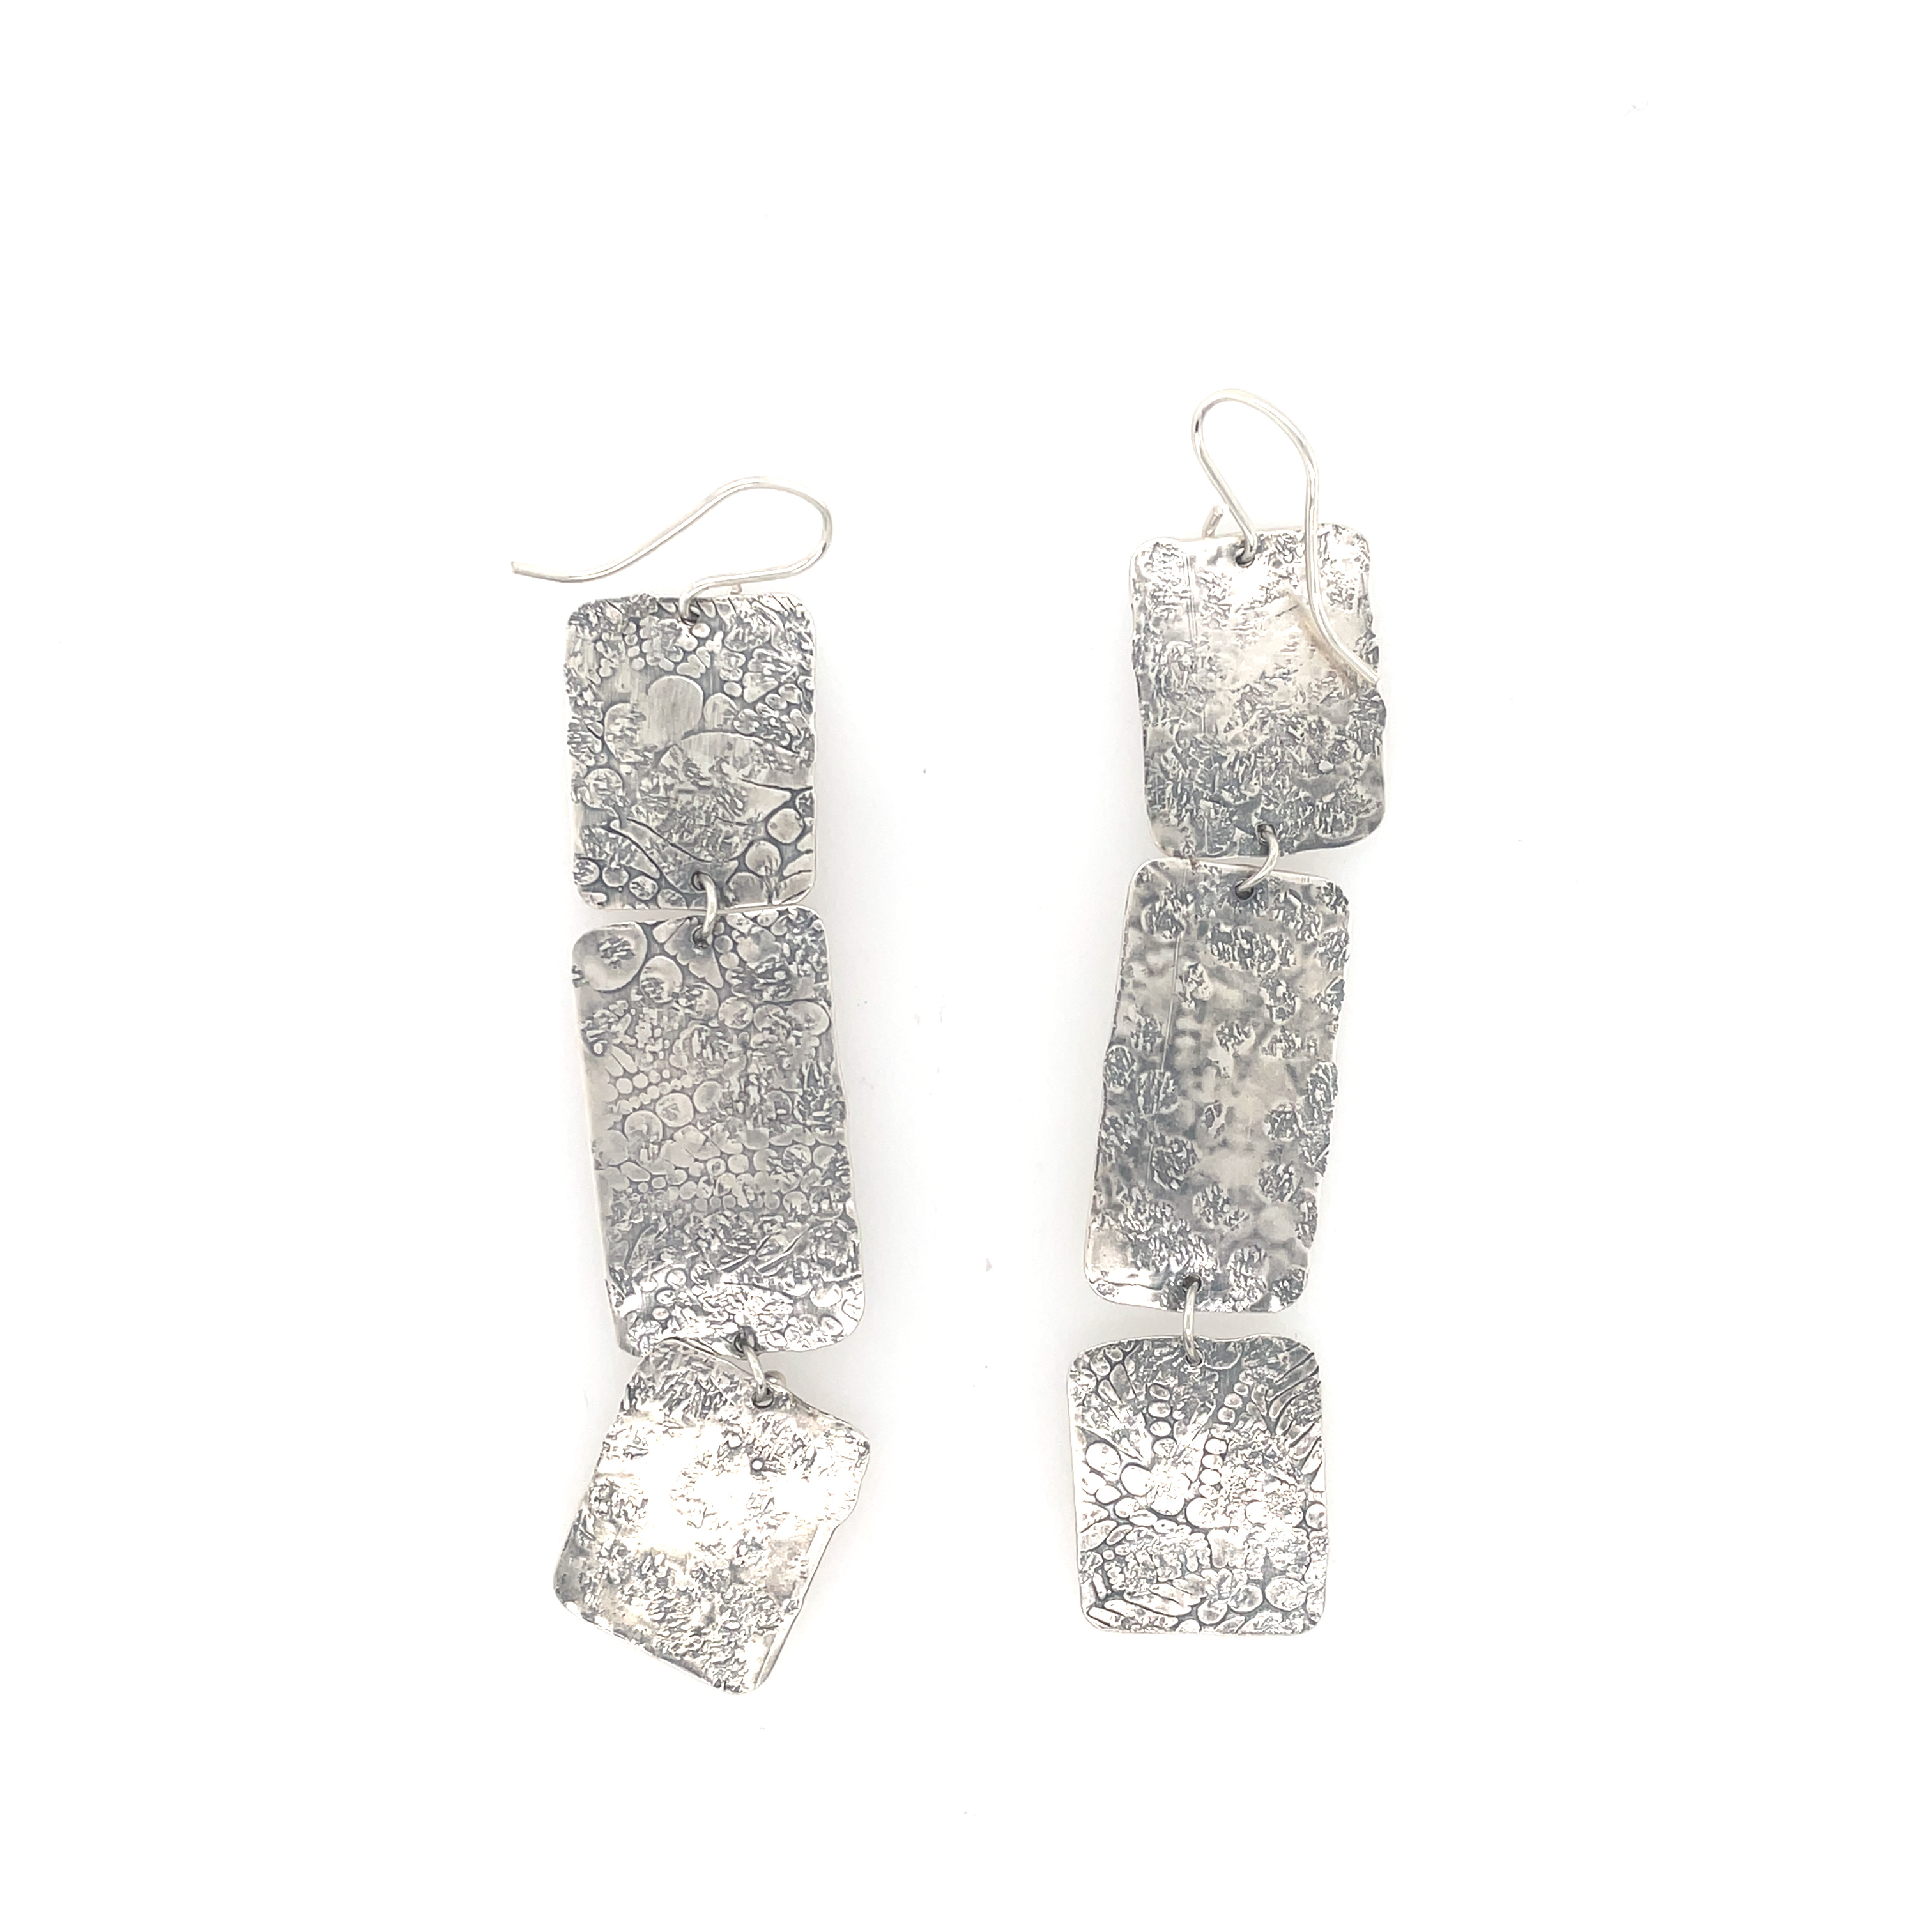 Hand Hammered 3 Part Earrings with Oxidized Sterling